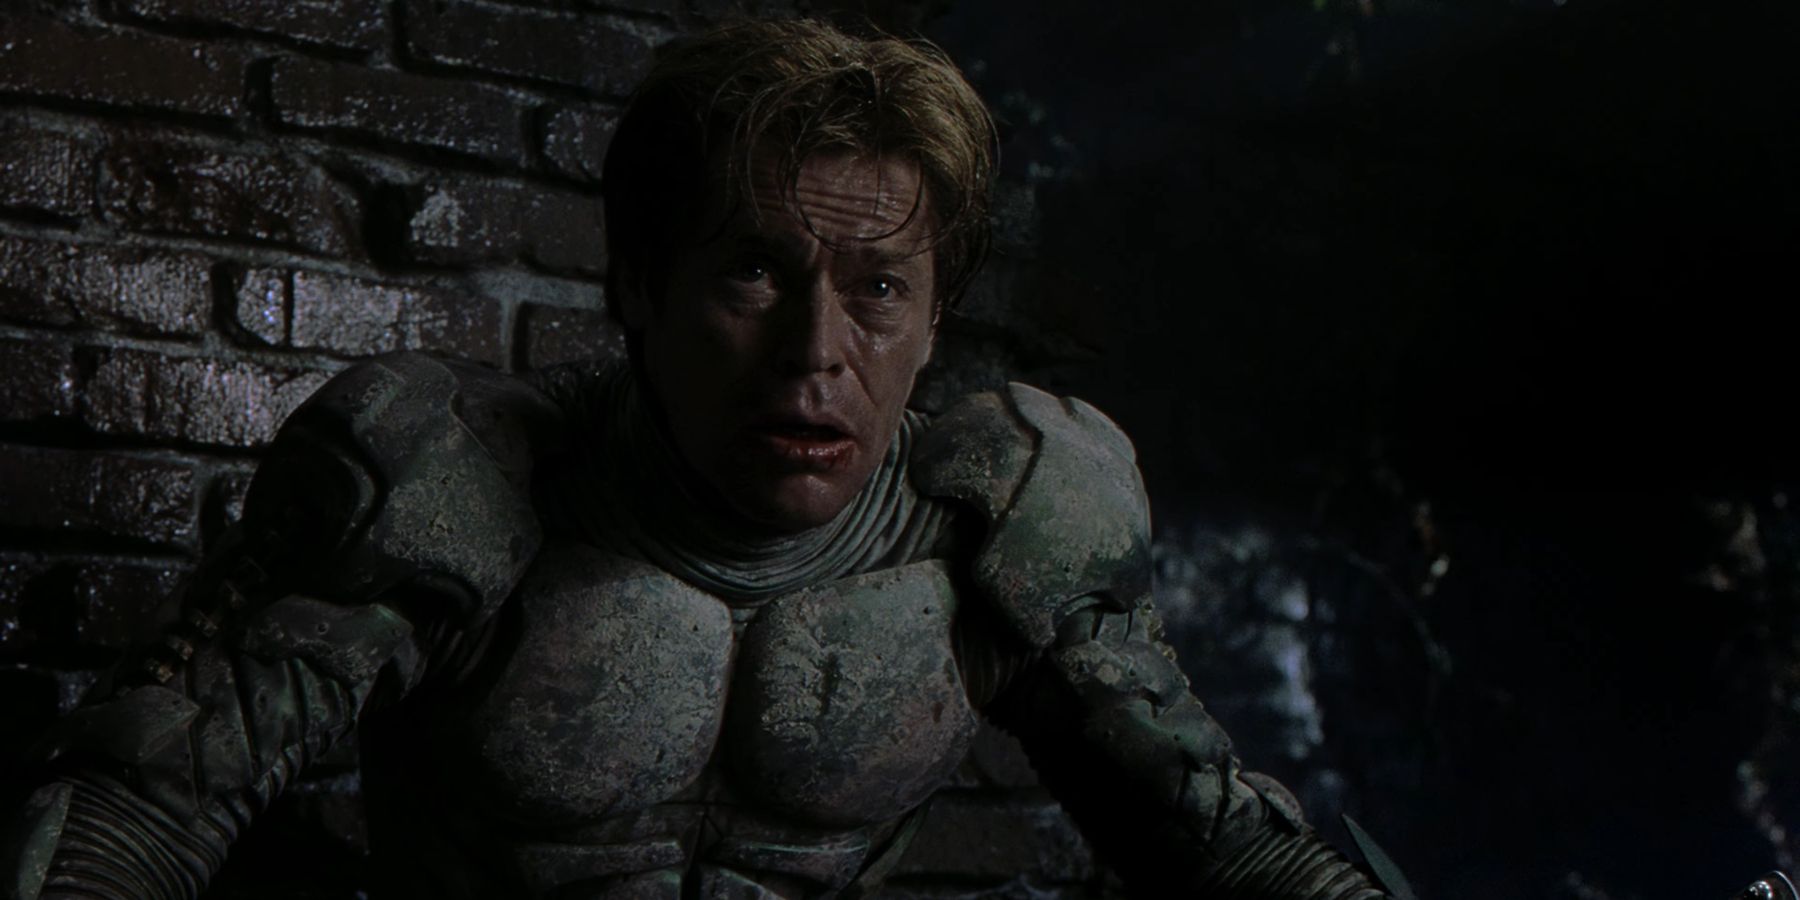 Green Goblin letting out his final words after being impaled by his glider in Spider-Man 2002